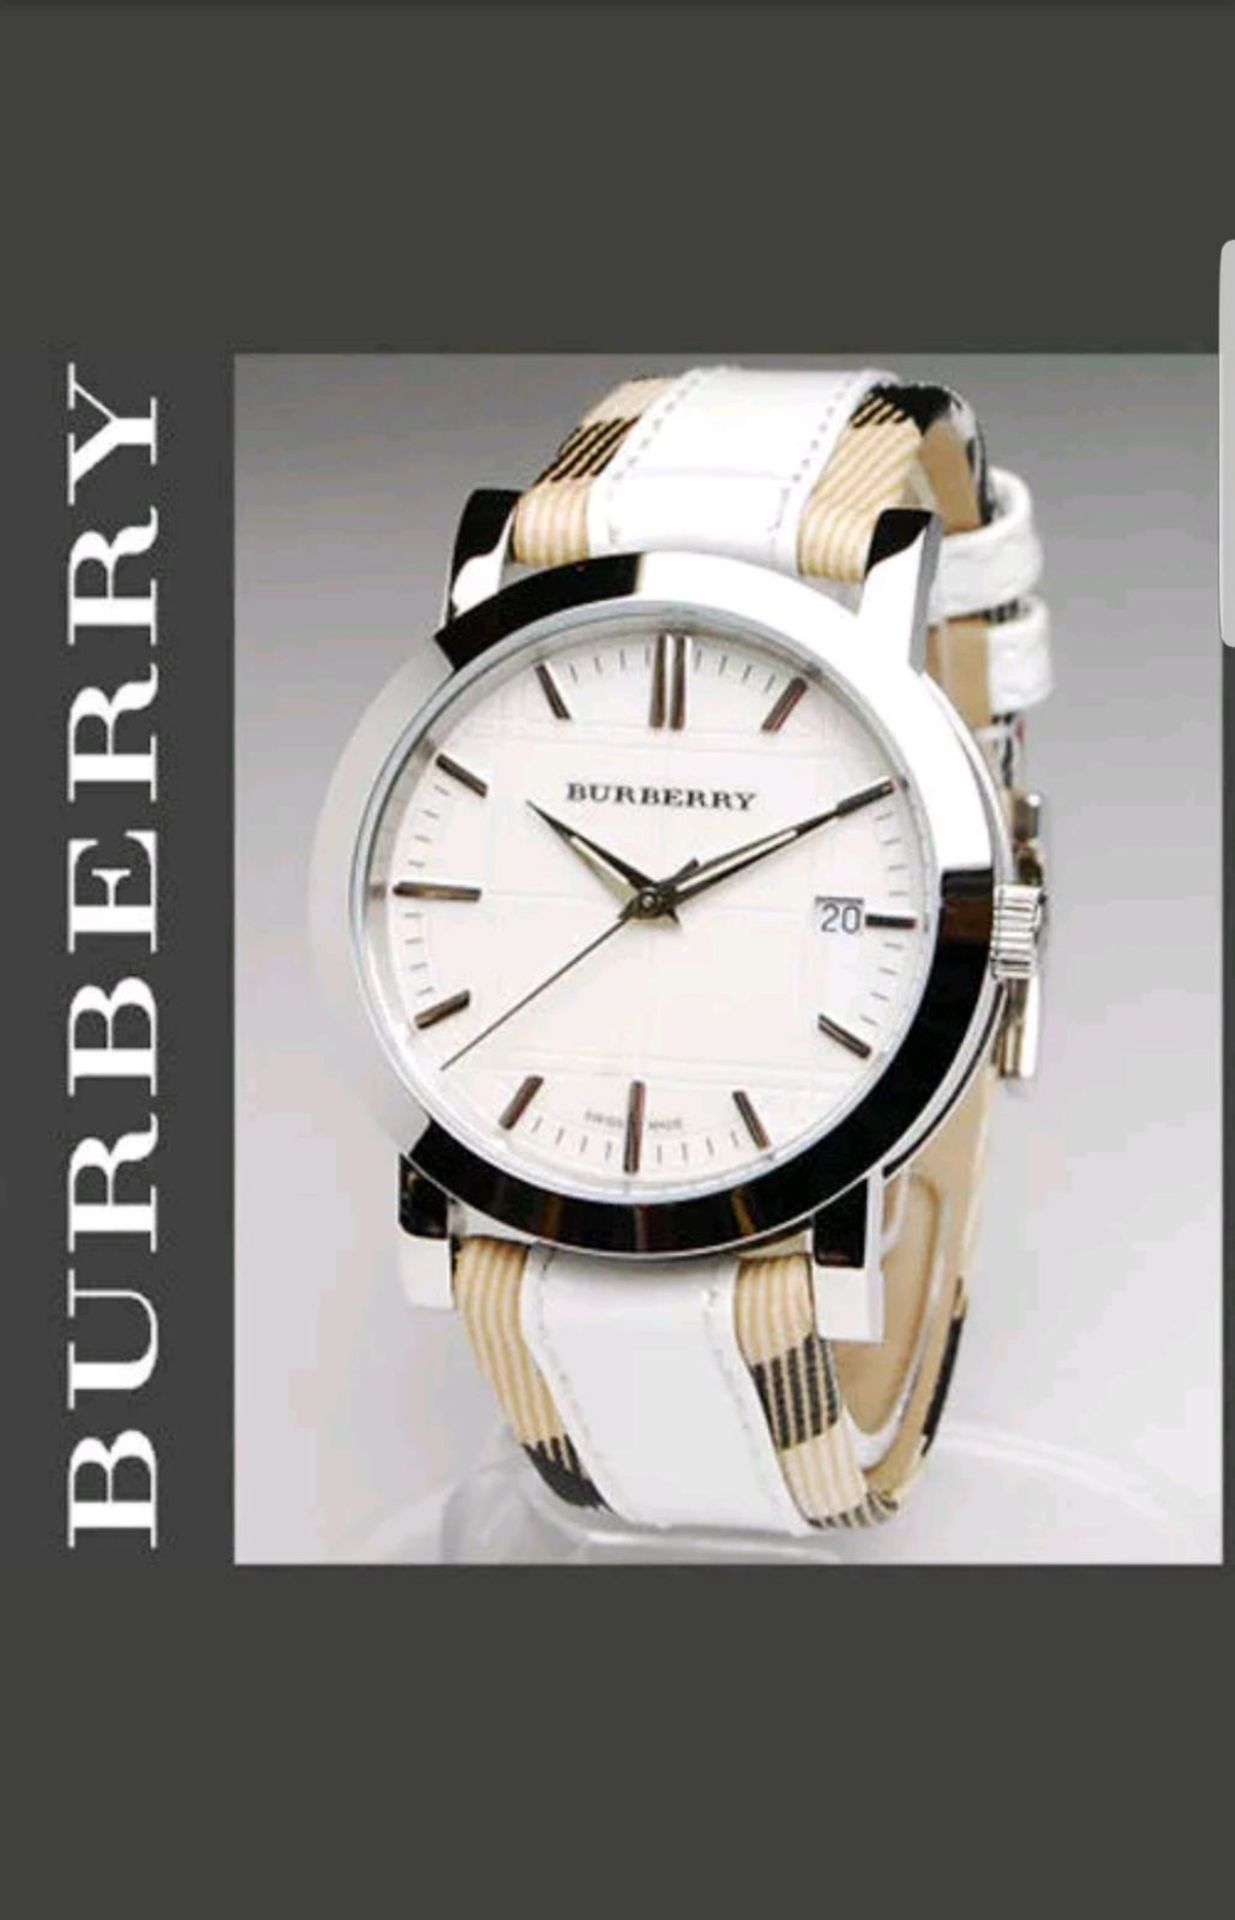 BRAND NEW LADIES BURBERRY WATCH BU1379, COMPLETE WITH ORIGINAL BOX AND MANUAL